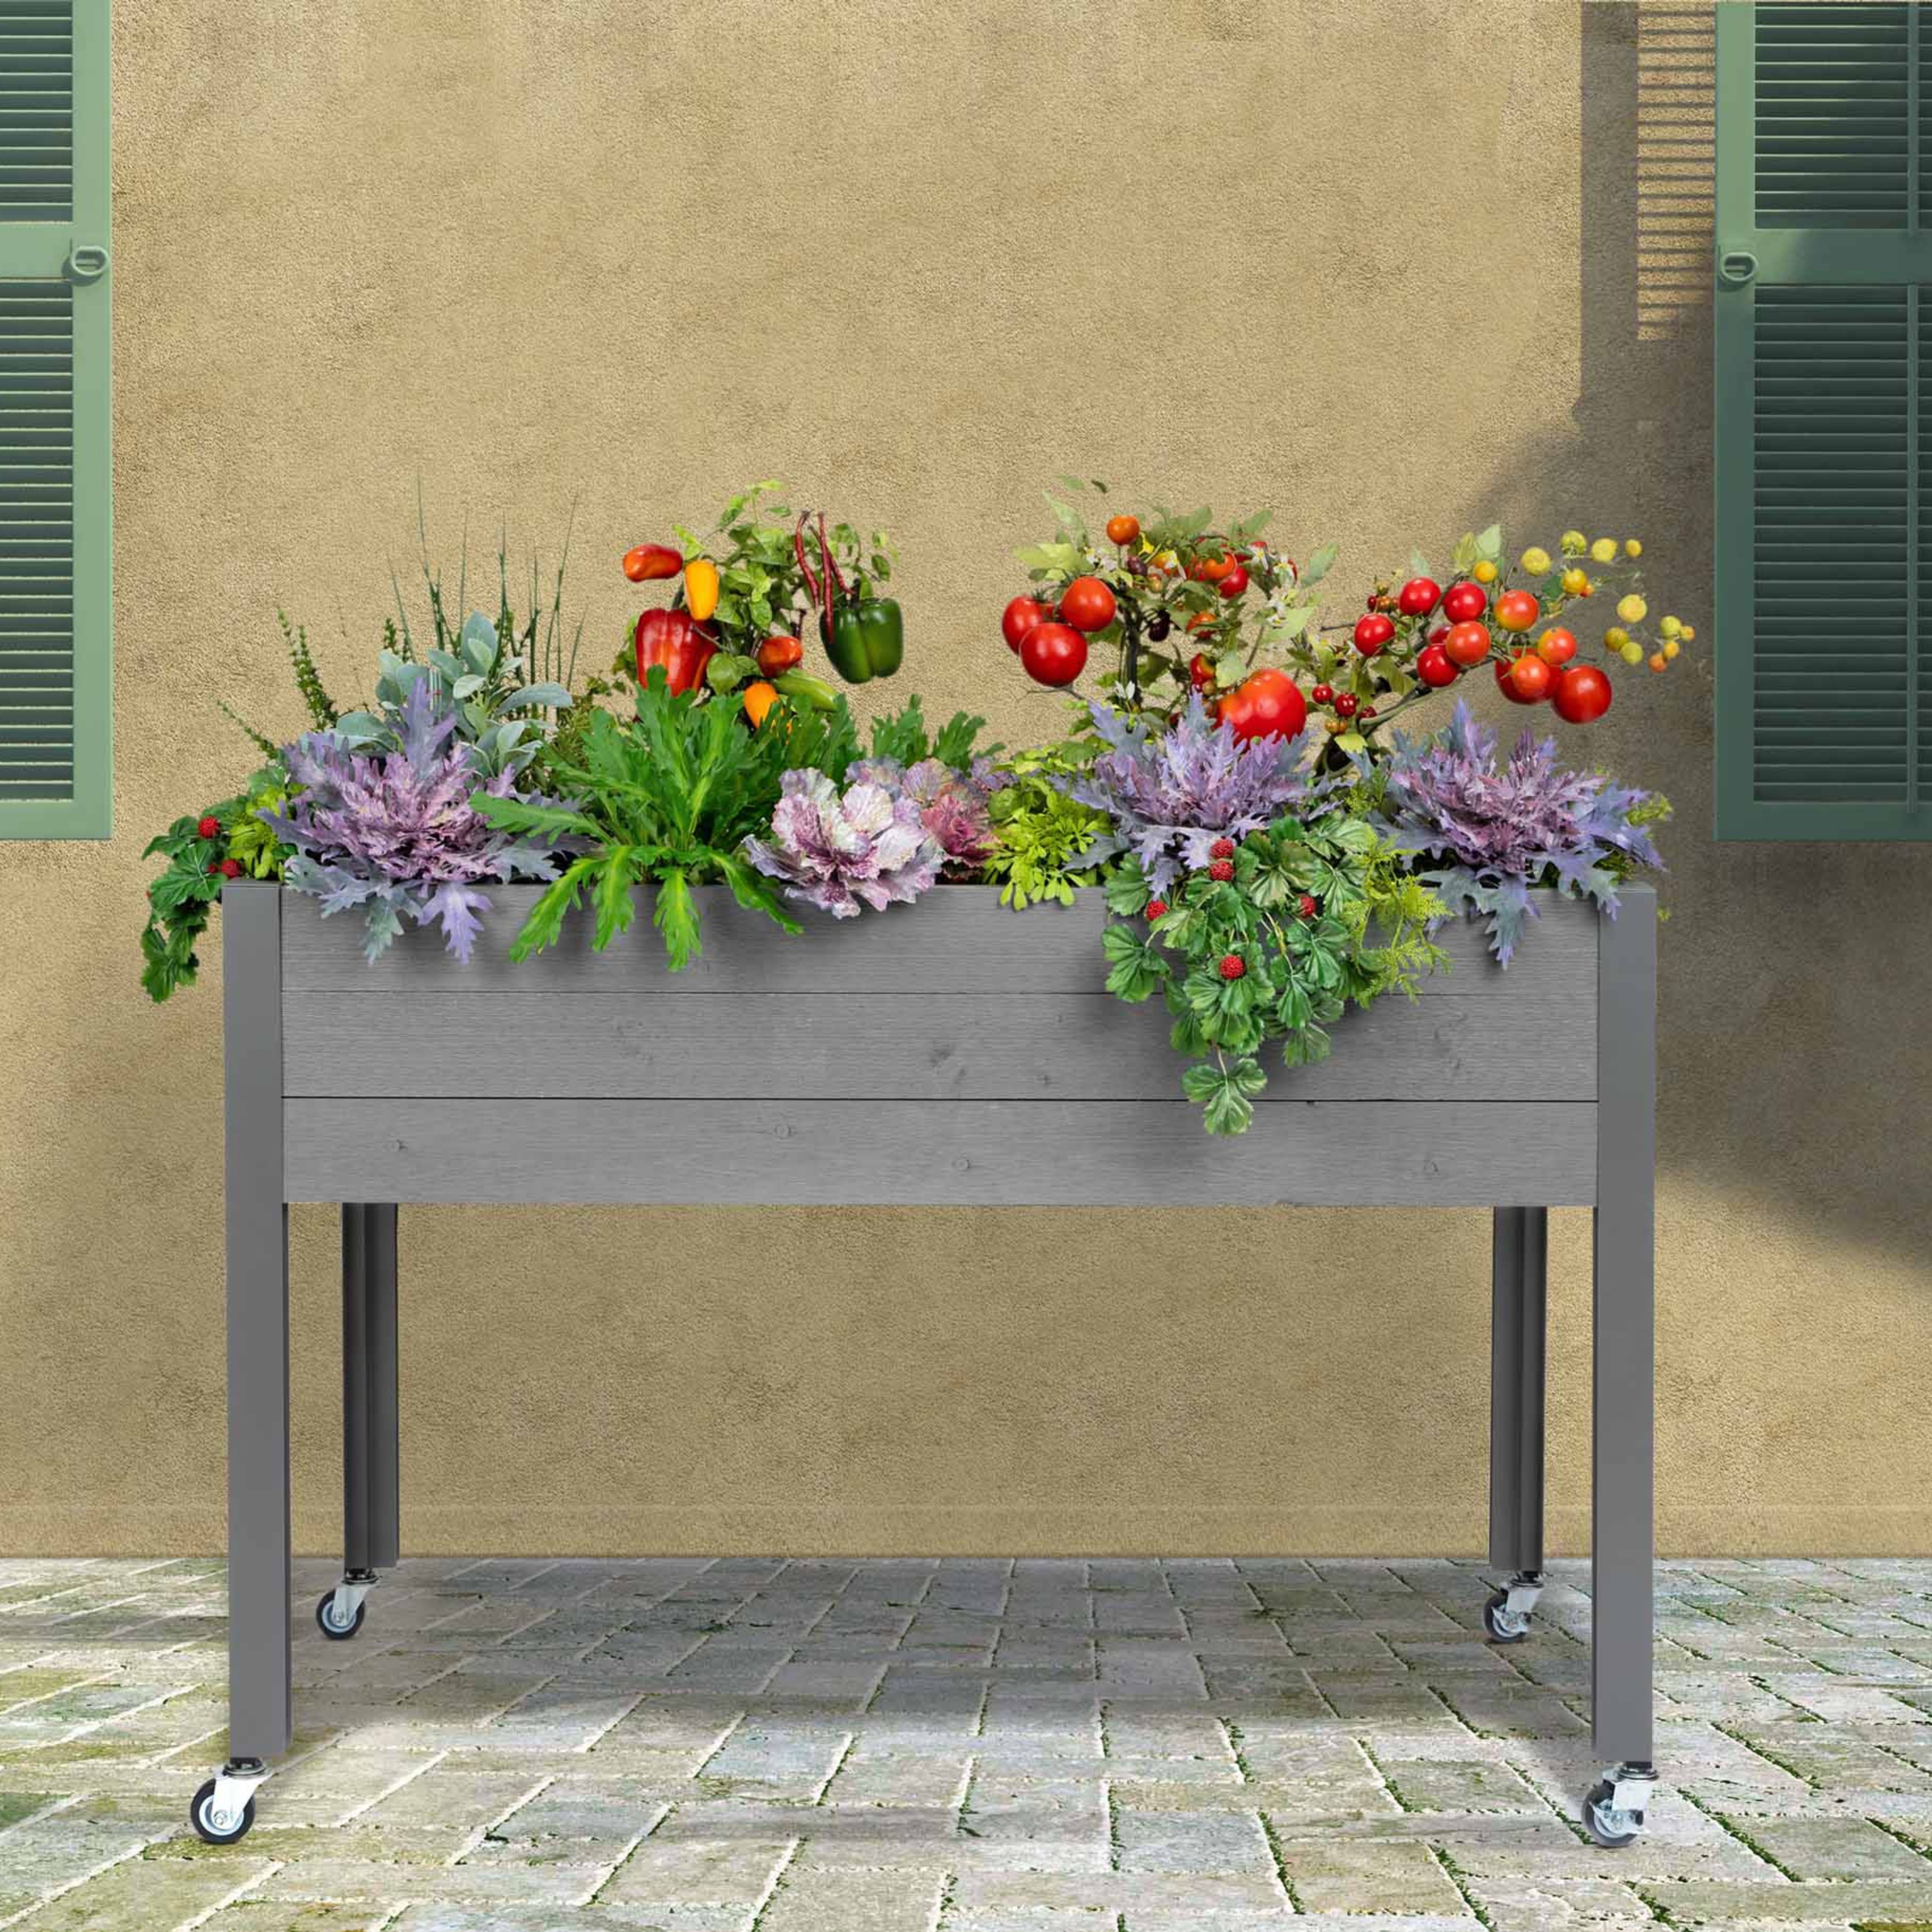 Self-Watering Spruce Planter (21" x 47" x 32"H)